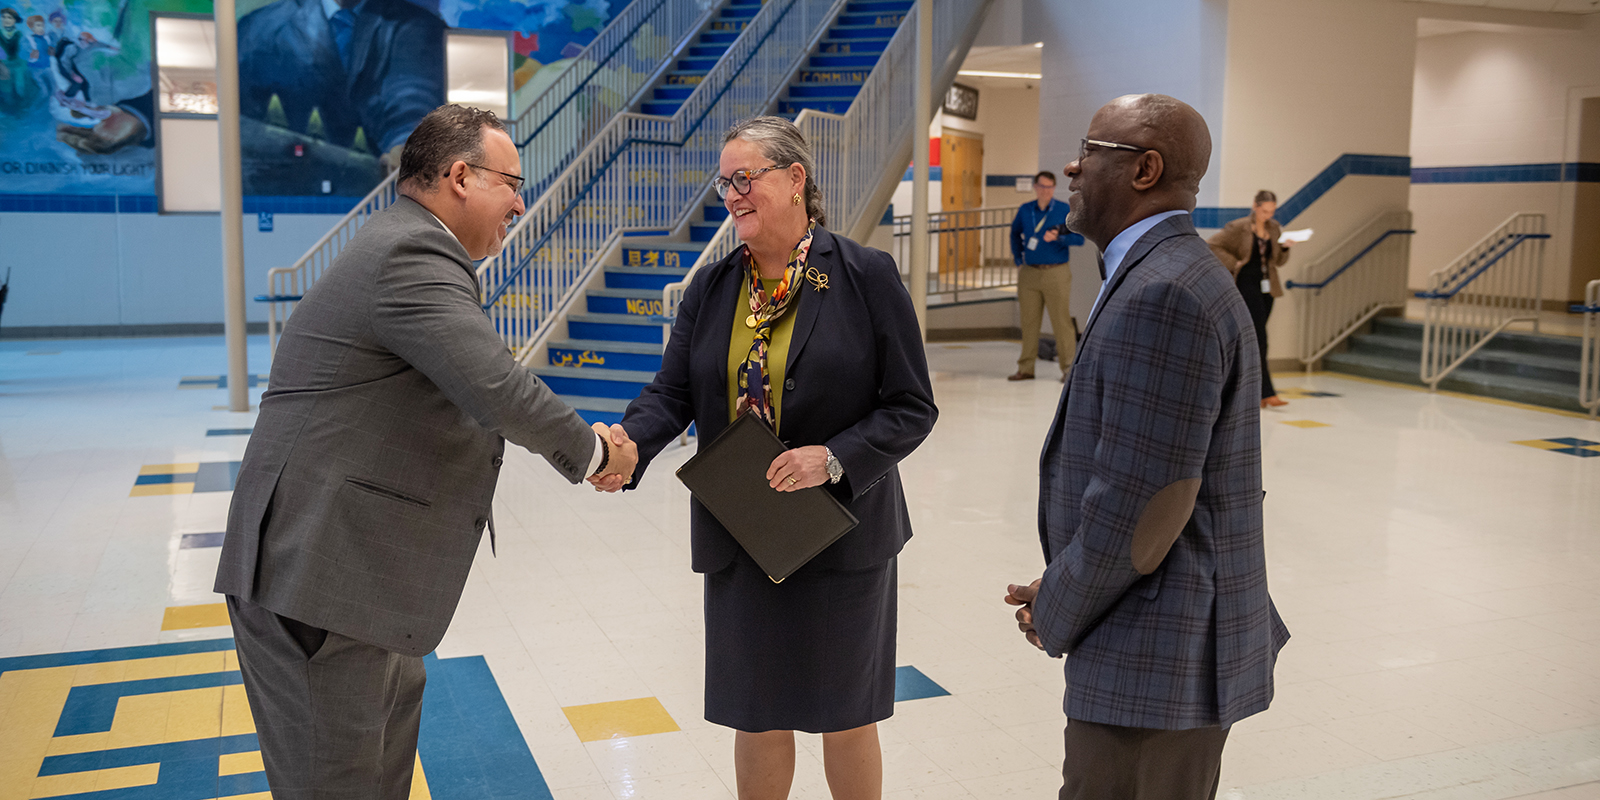 Lewis HS Principal Alfonso Smith and FCPS Superintendent Dr. Michelle Reid greets U.S. Education Sec. Miguel Cardona as he visits Lewis for a mental health town hall.